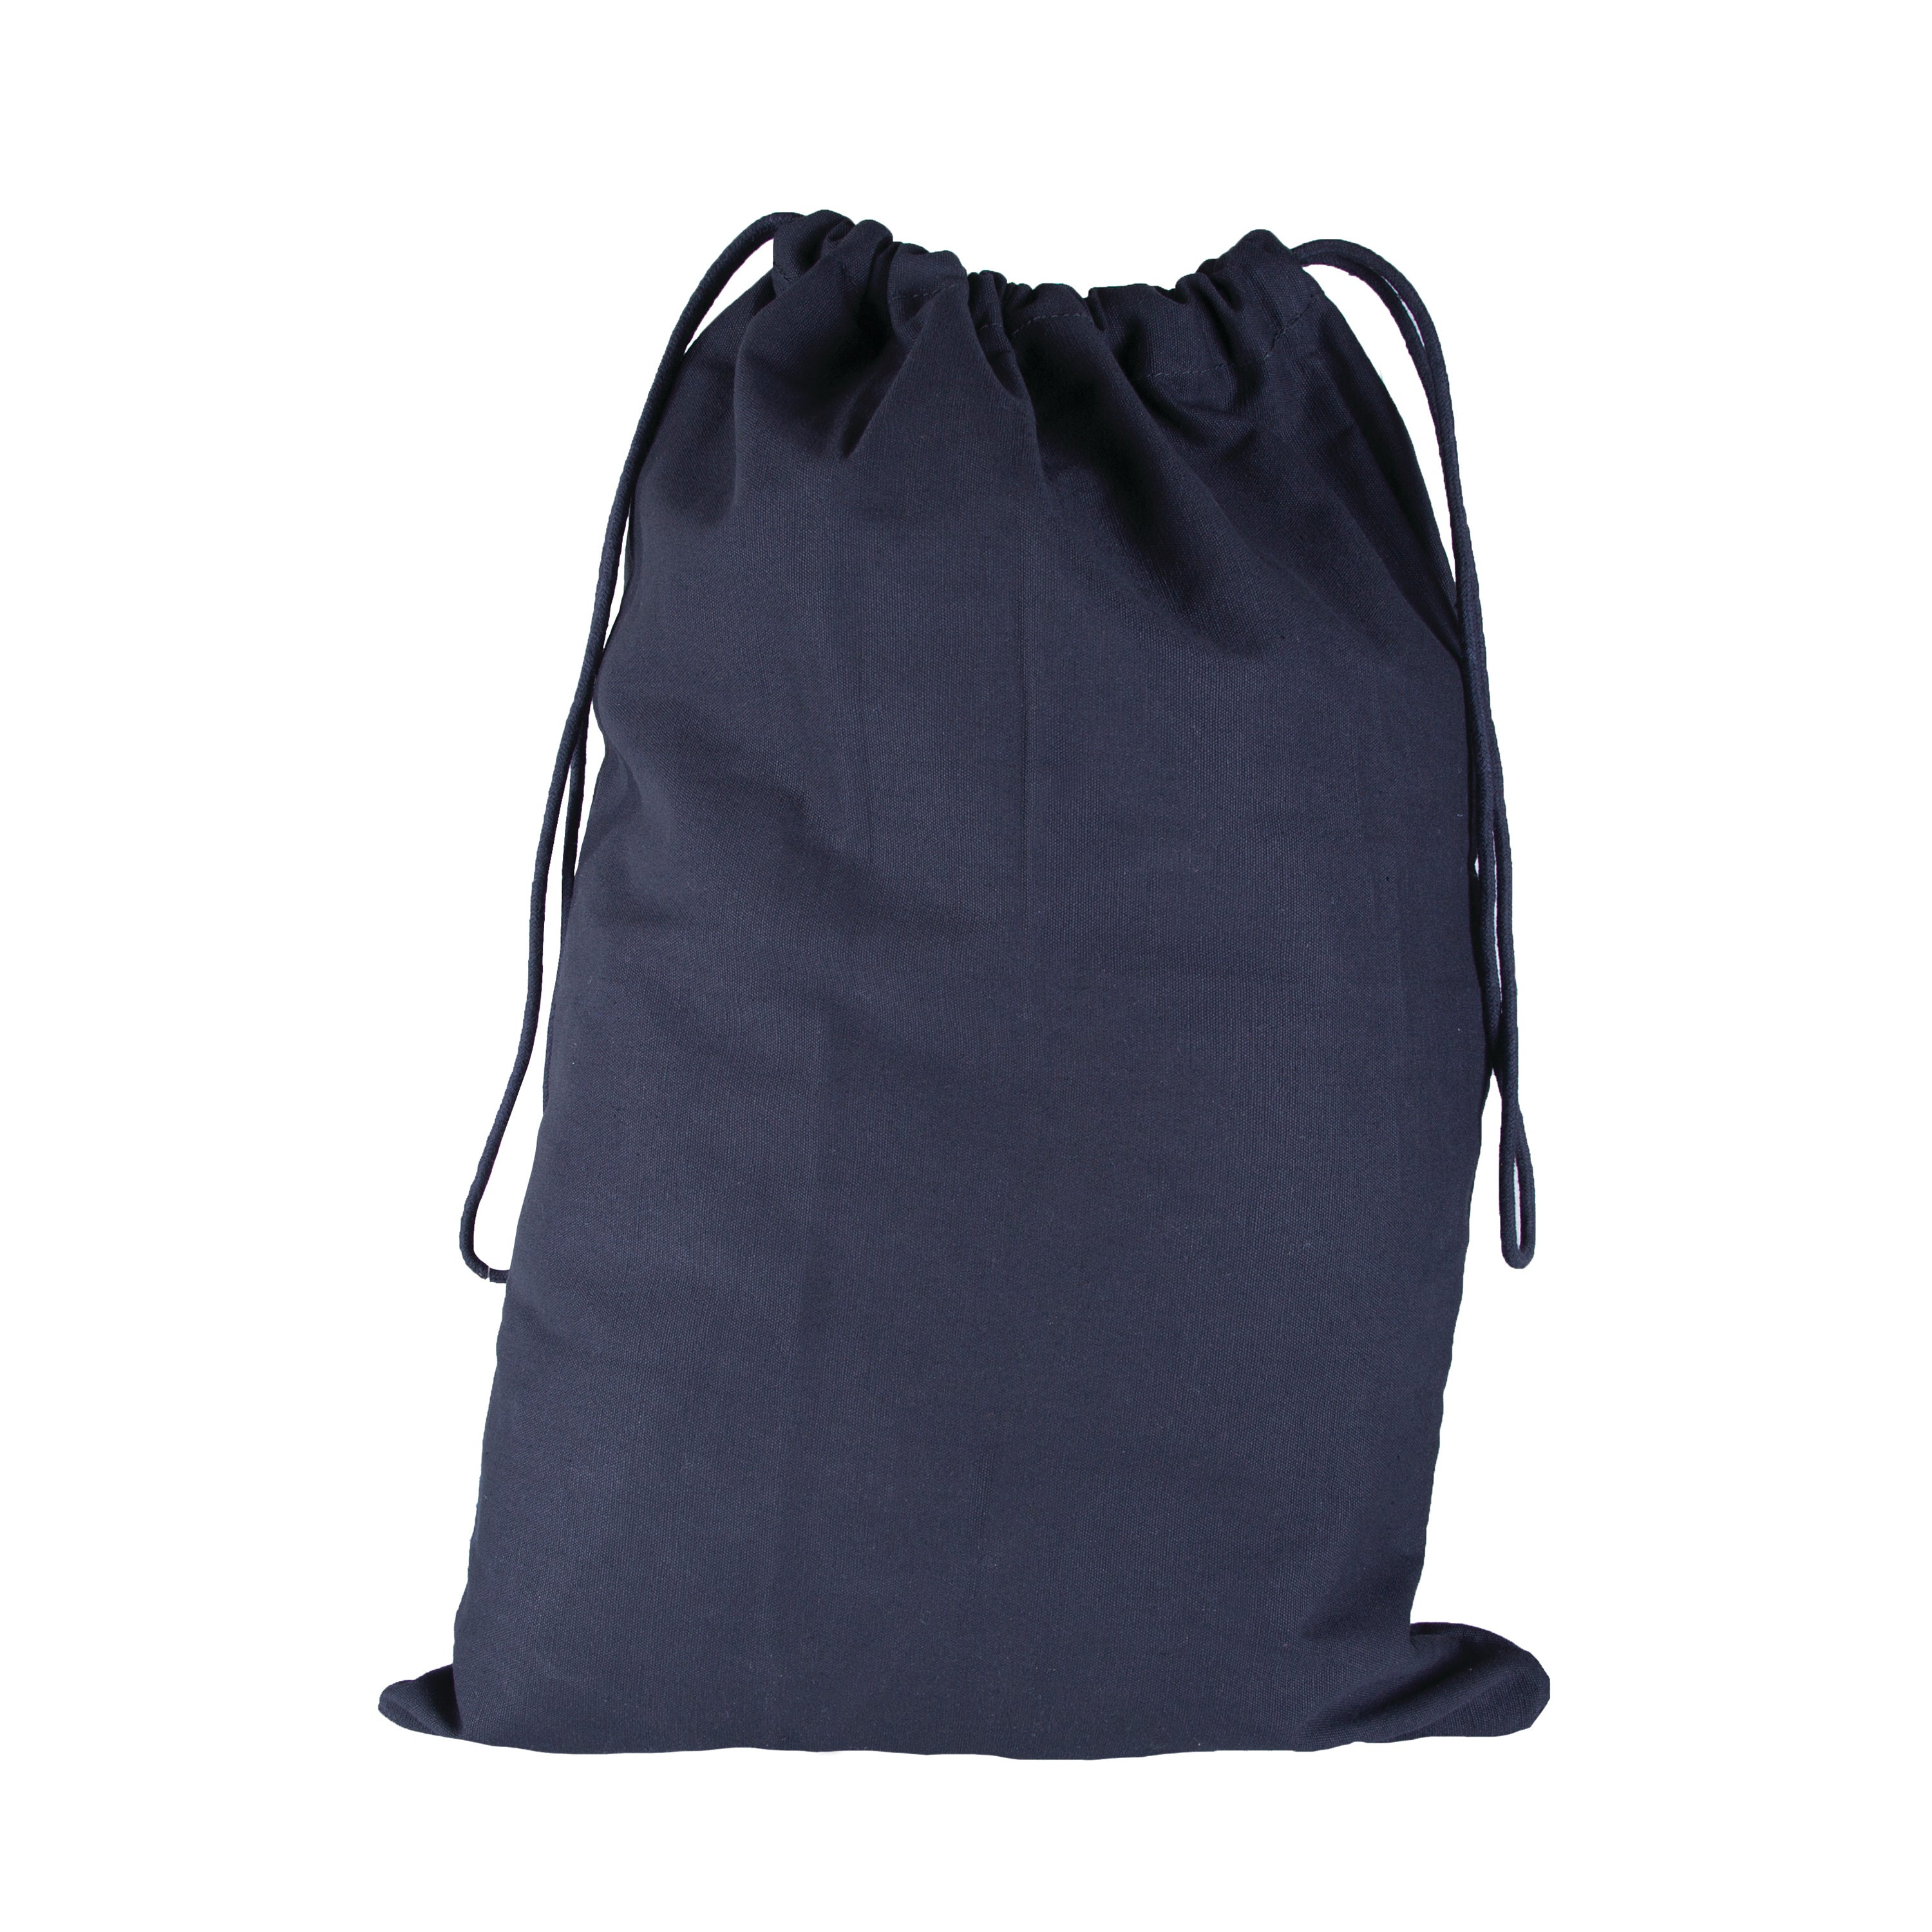 Canvas Laundry Bag - Black - 18 In X 27 In